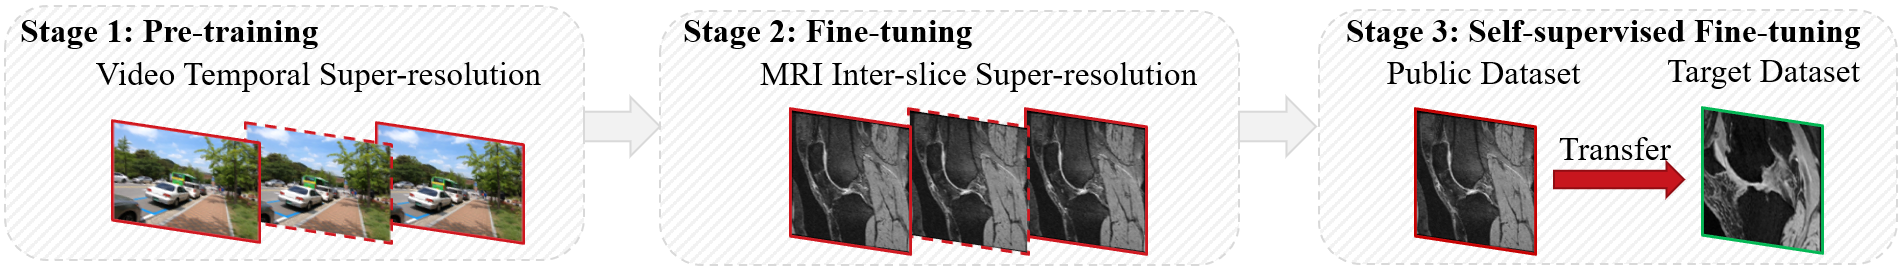 Inter-slice Super-resolution of Magnetic Resonance Images by Pre-training and Self-supervised Fine-tuning